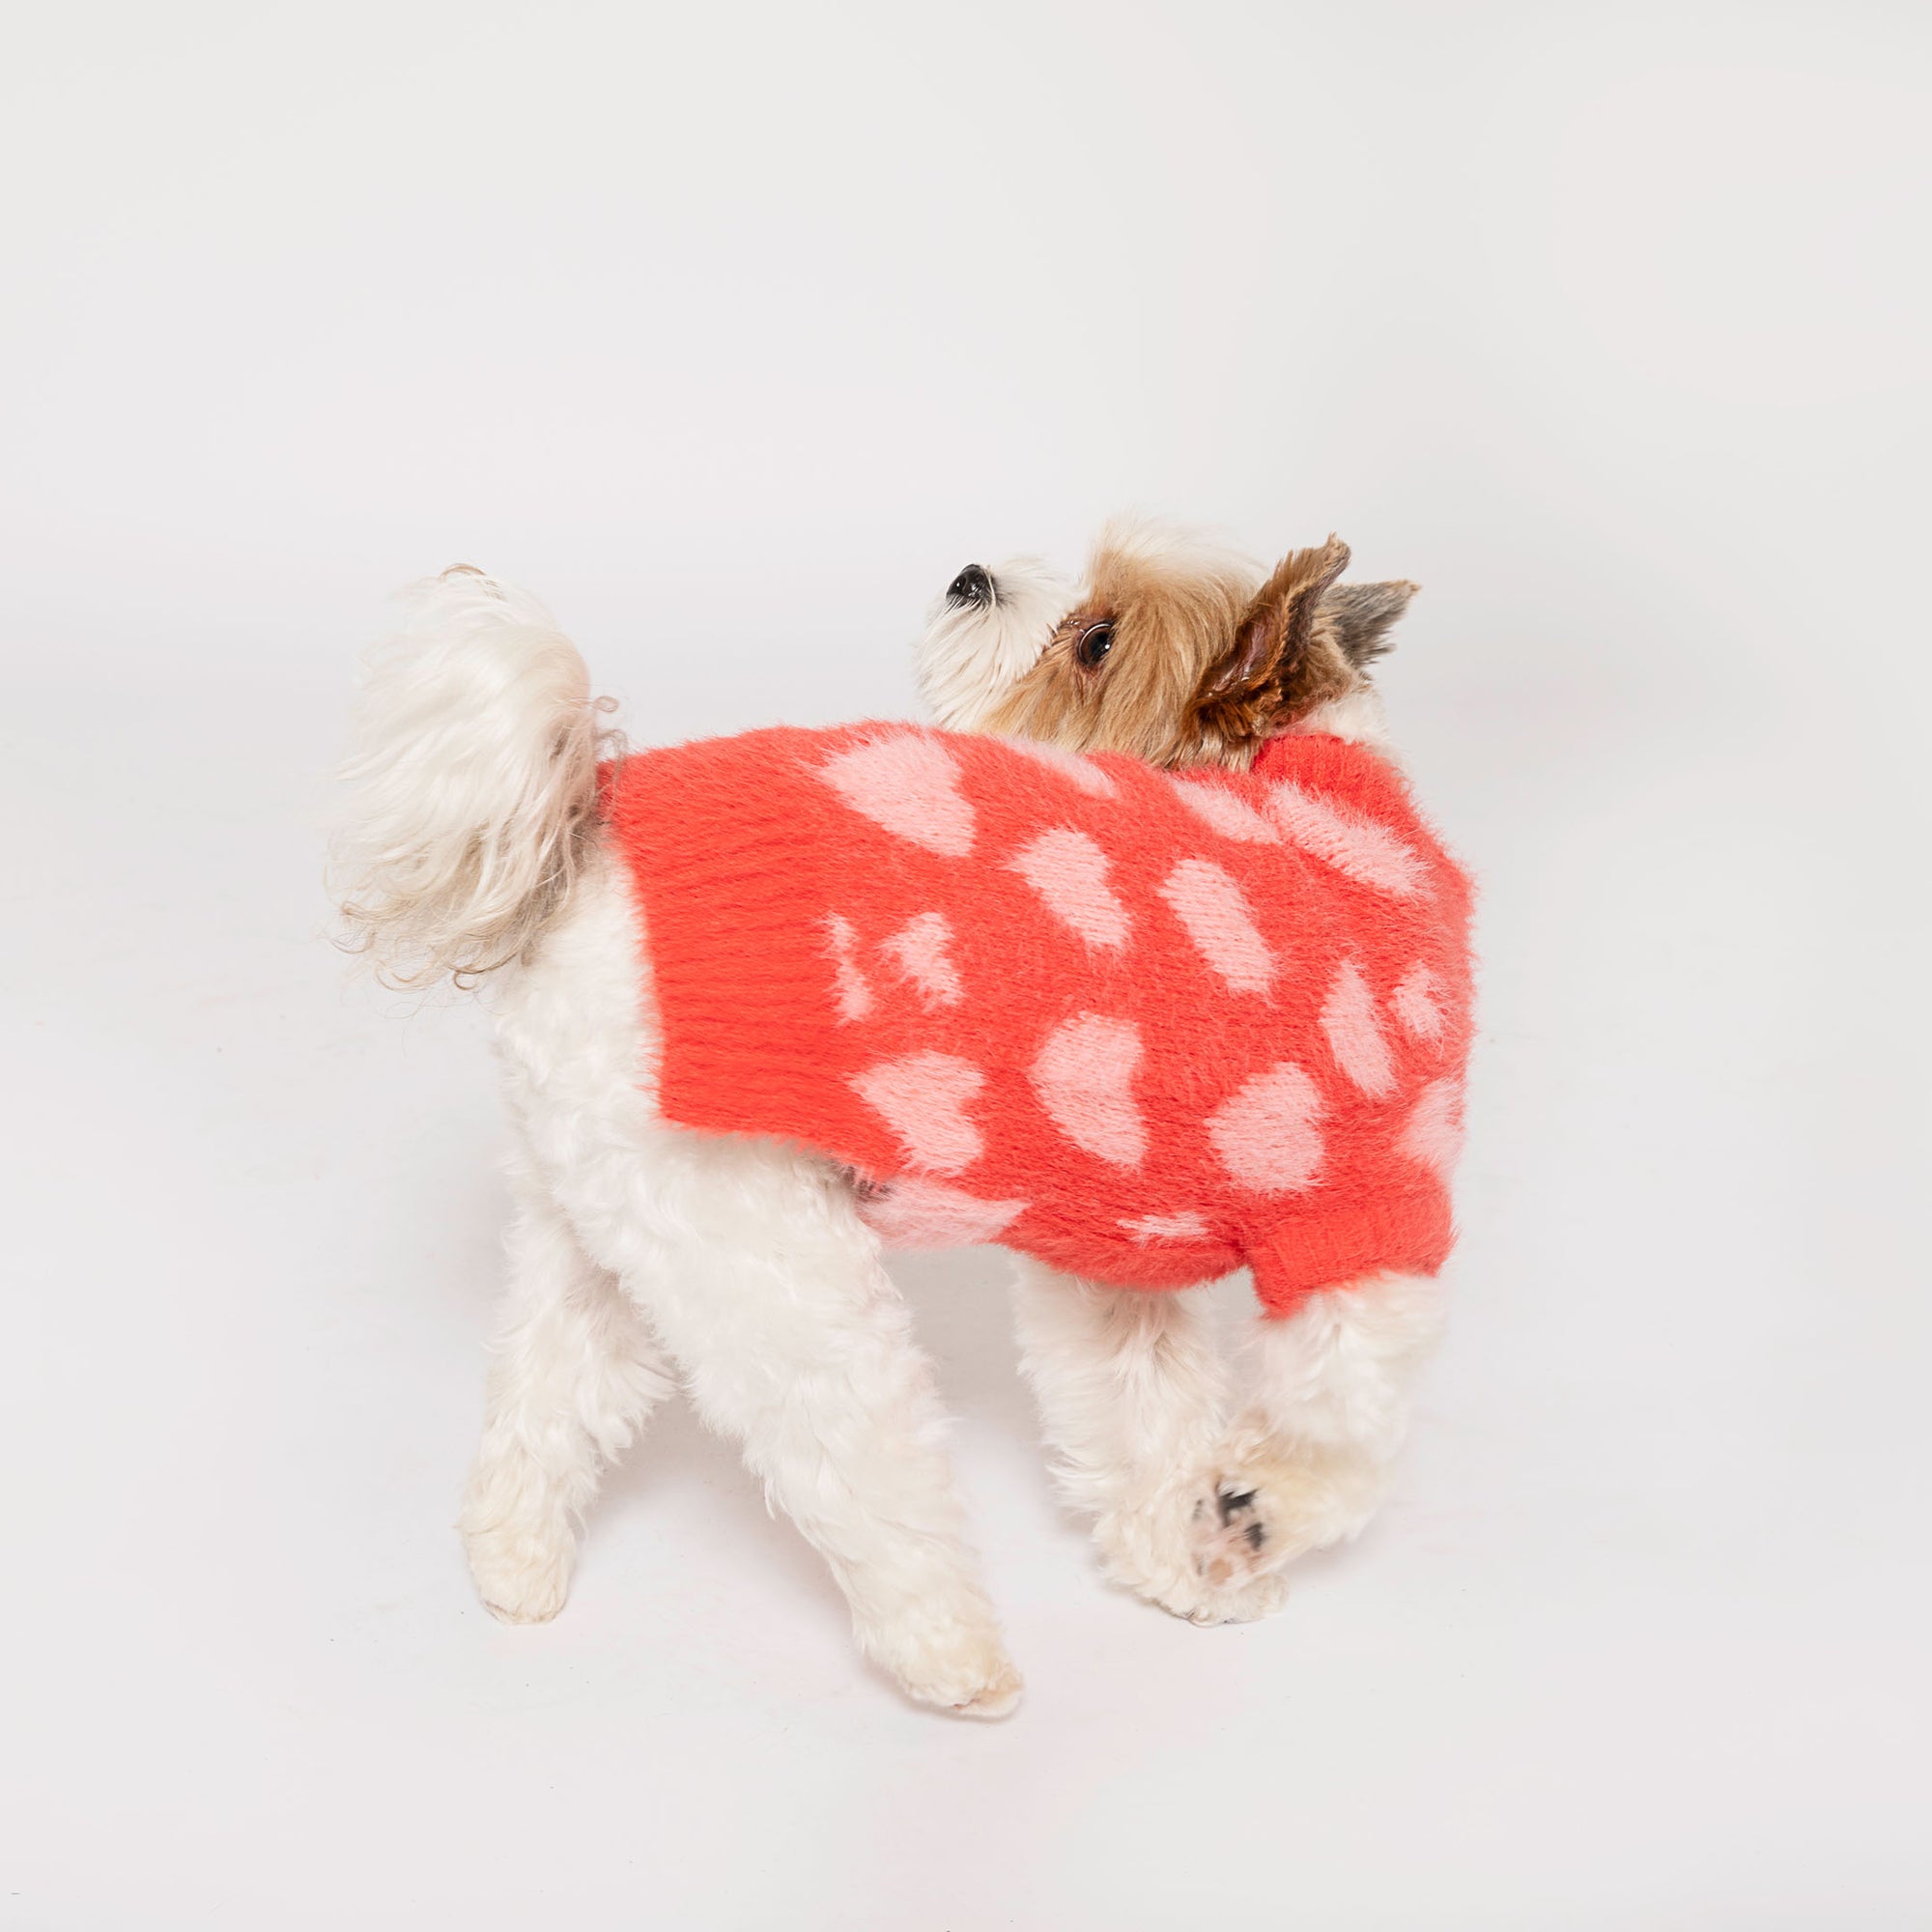 Small terrier mix dog with fluffy white fur wearing a cozy red sweater with pink hearts, looking upwards, set against a white studio background.